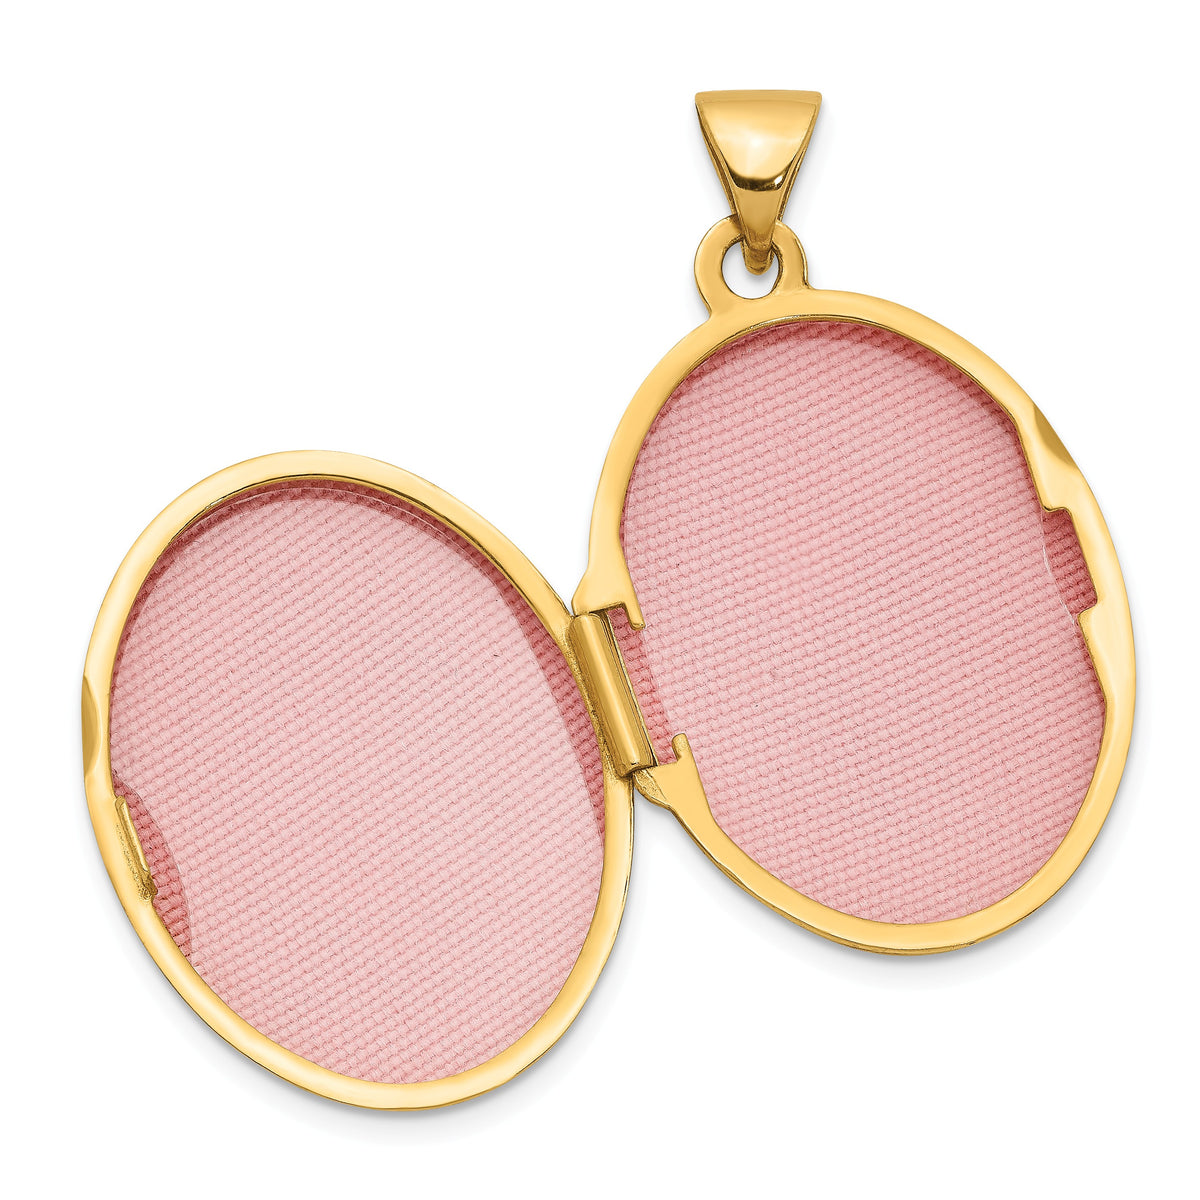 Alternate view of the 14k Yellow Gold 21mm Textured Oval Locket by The Black Bow Jewelry Co.